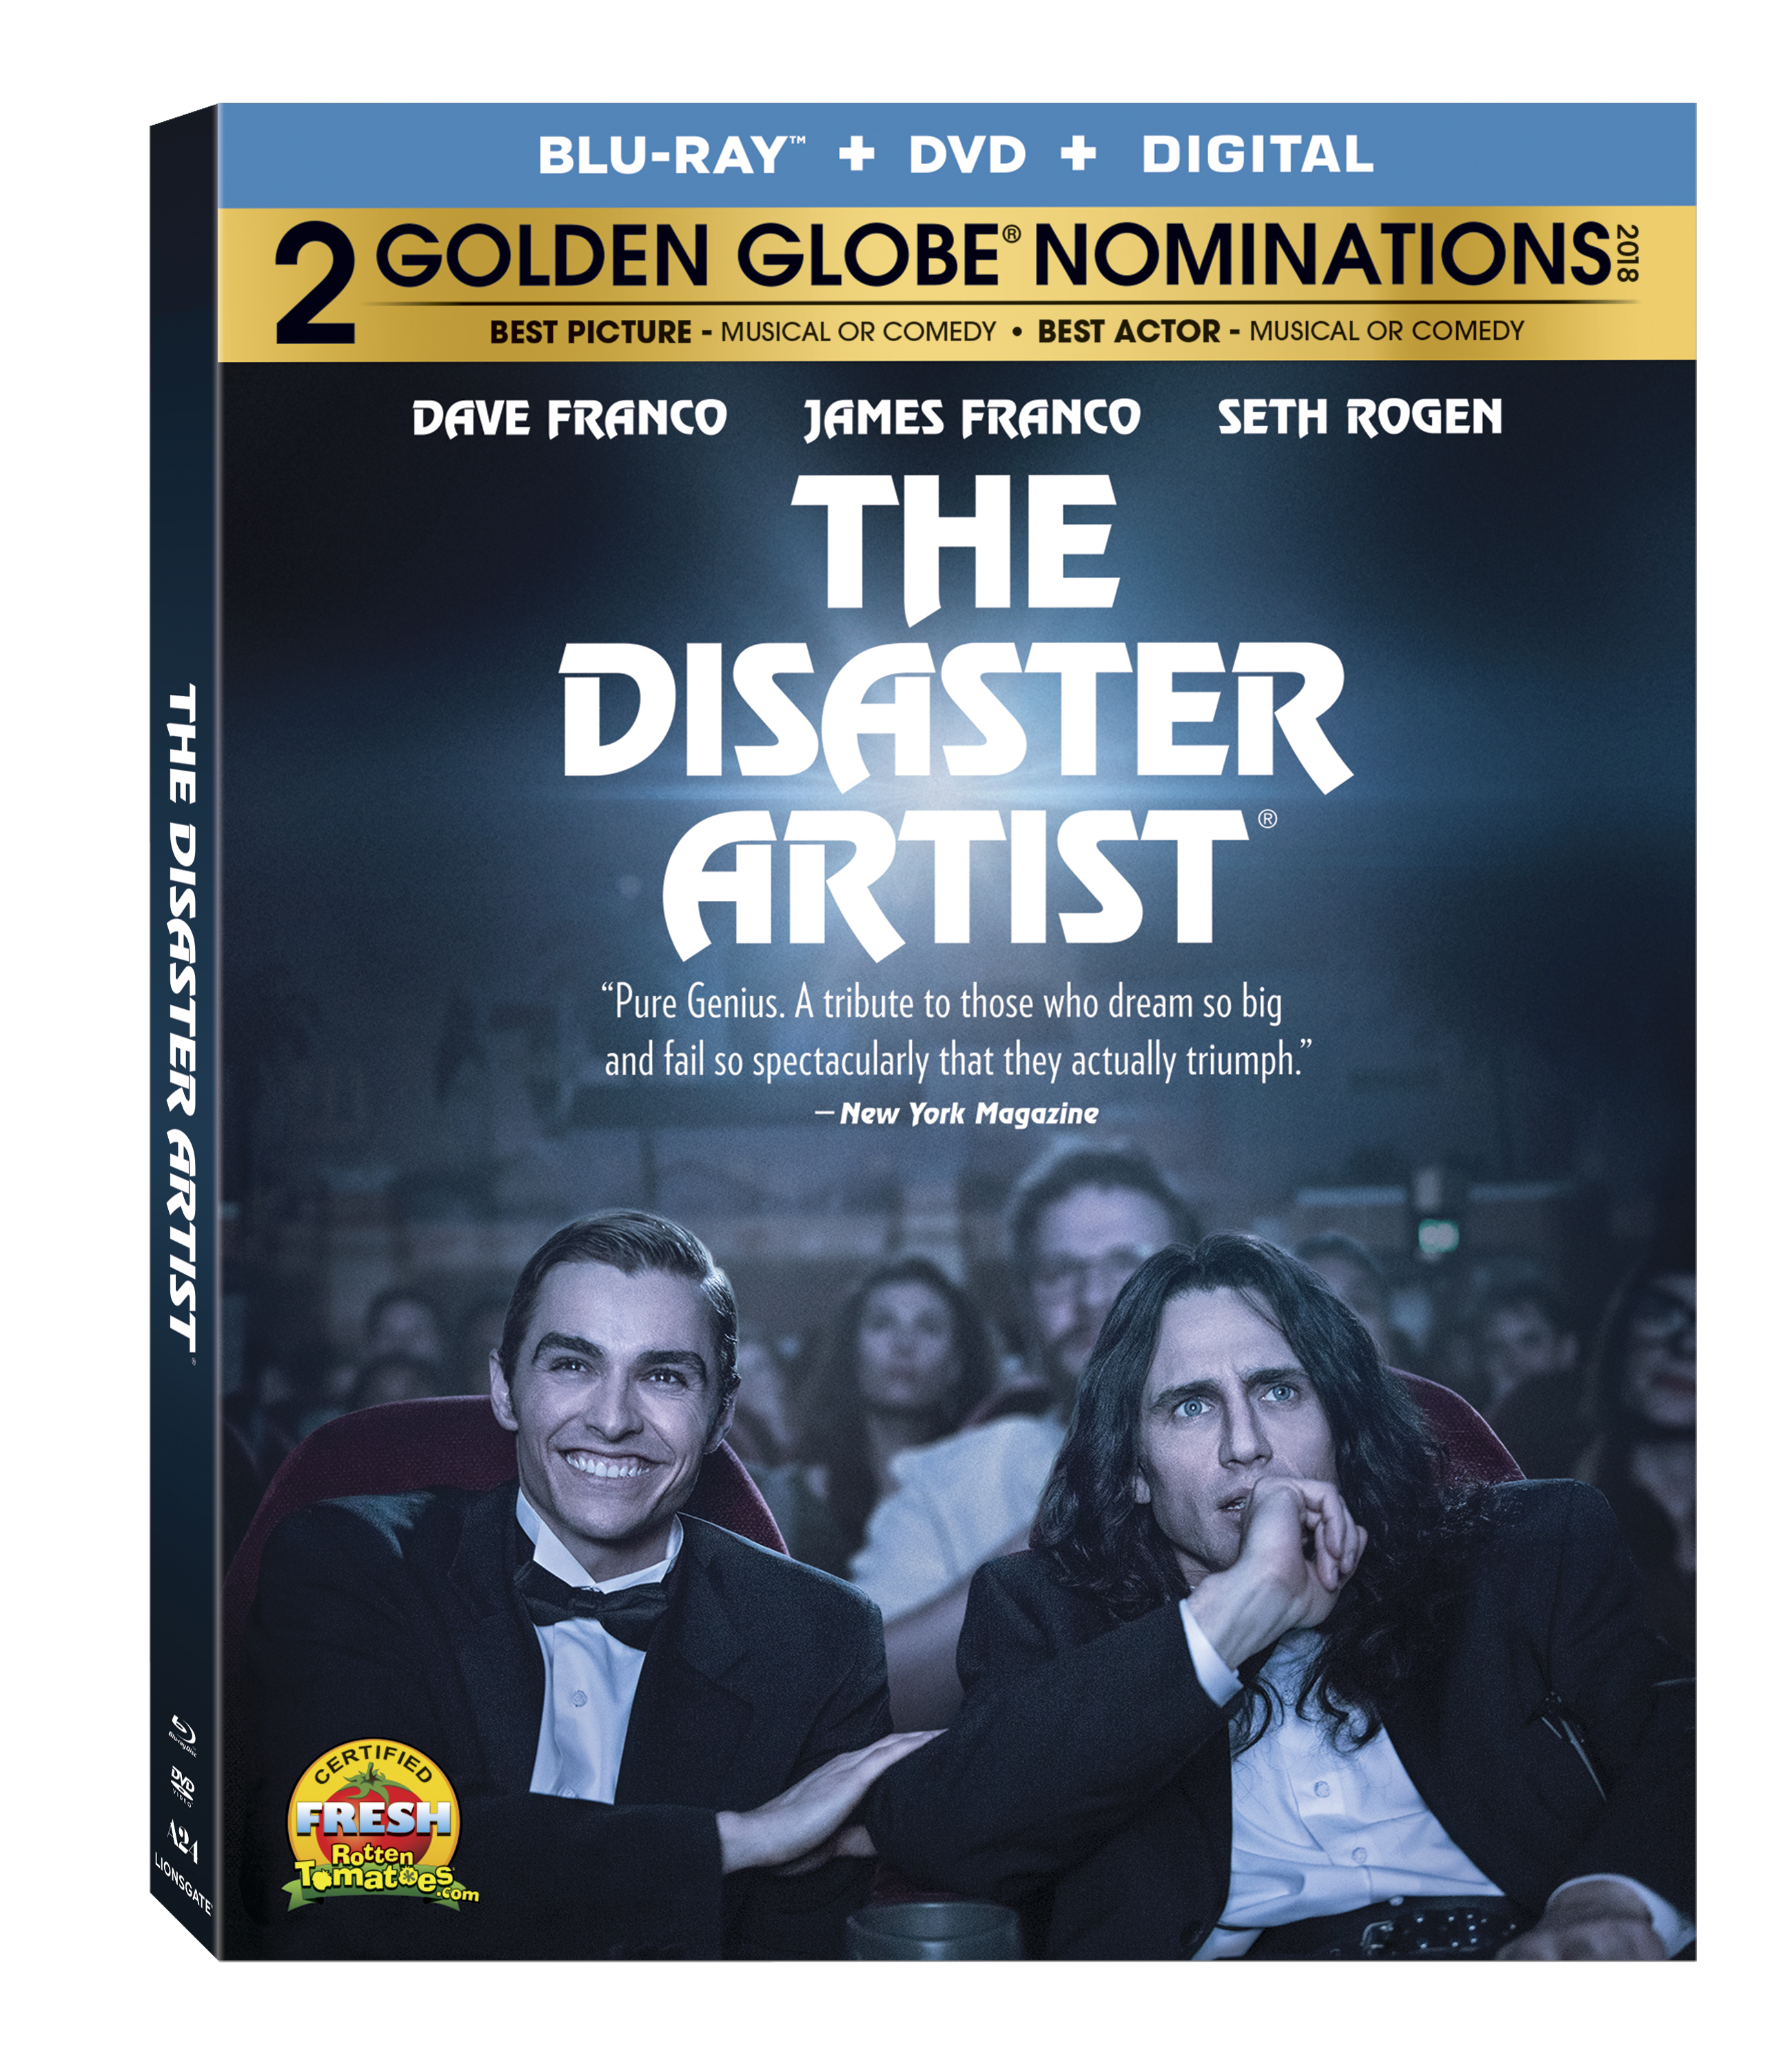 The Disaster Artist Blu-Ray Combo cover (Lionsgate Home Entertainment)